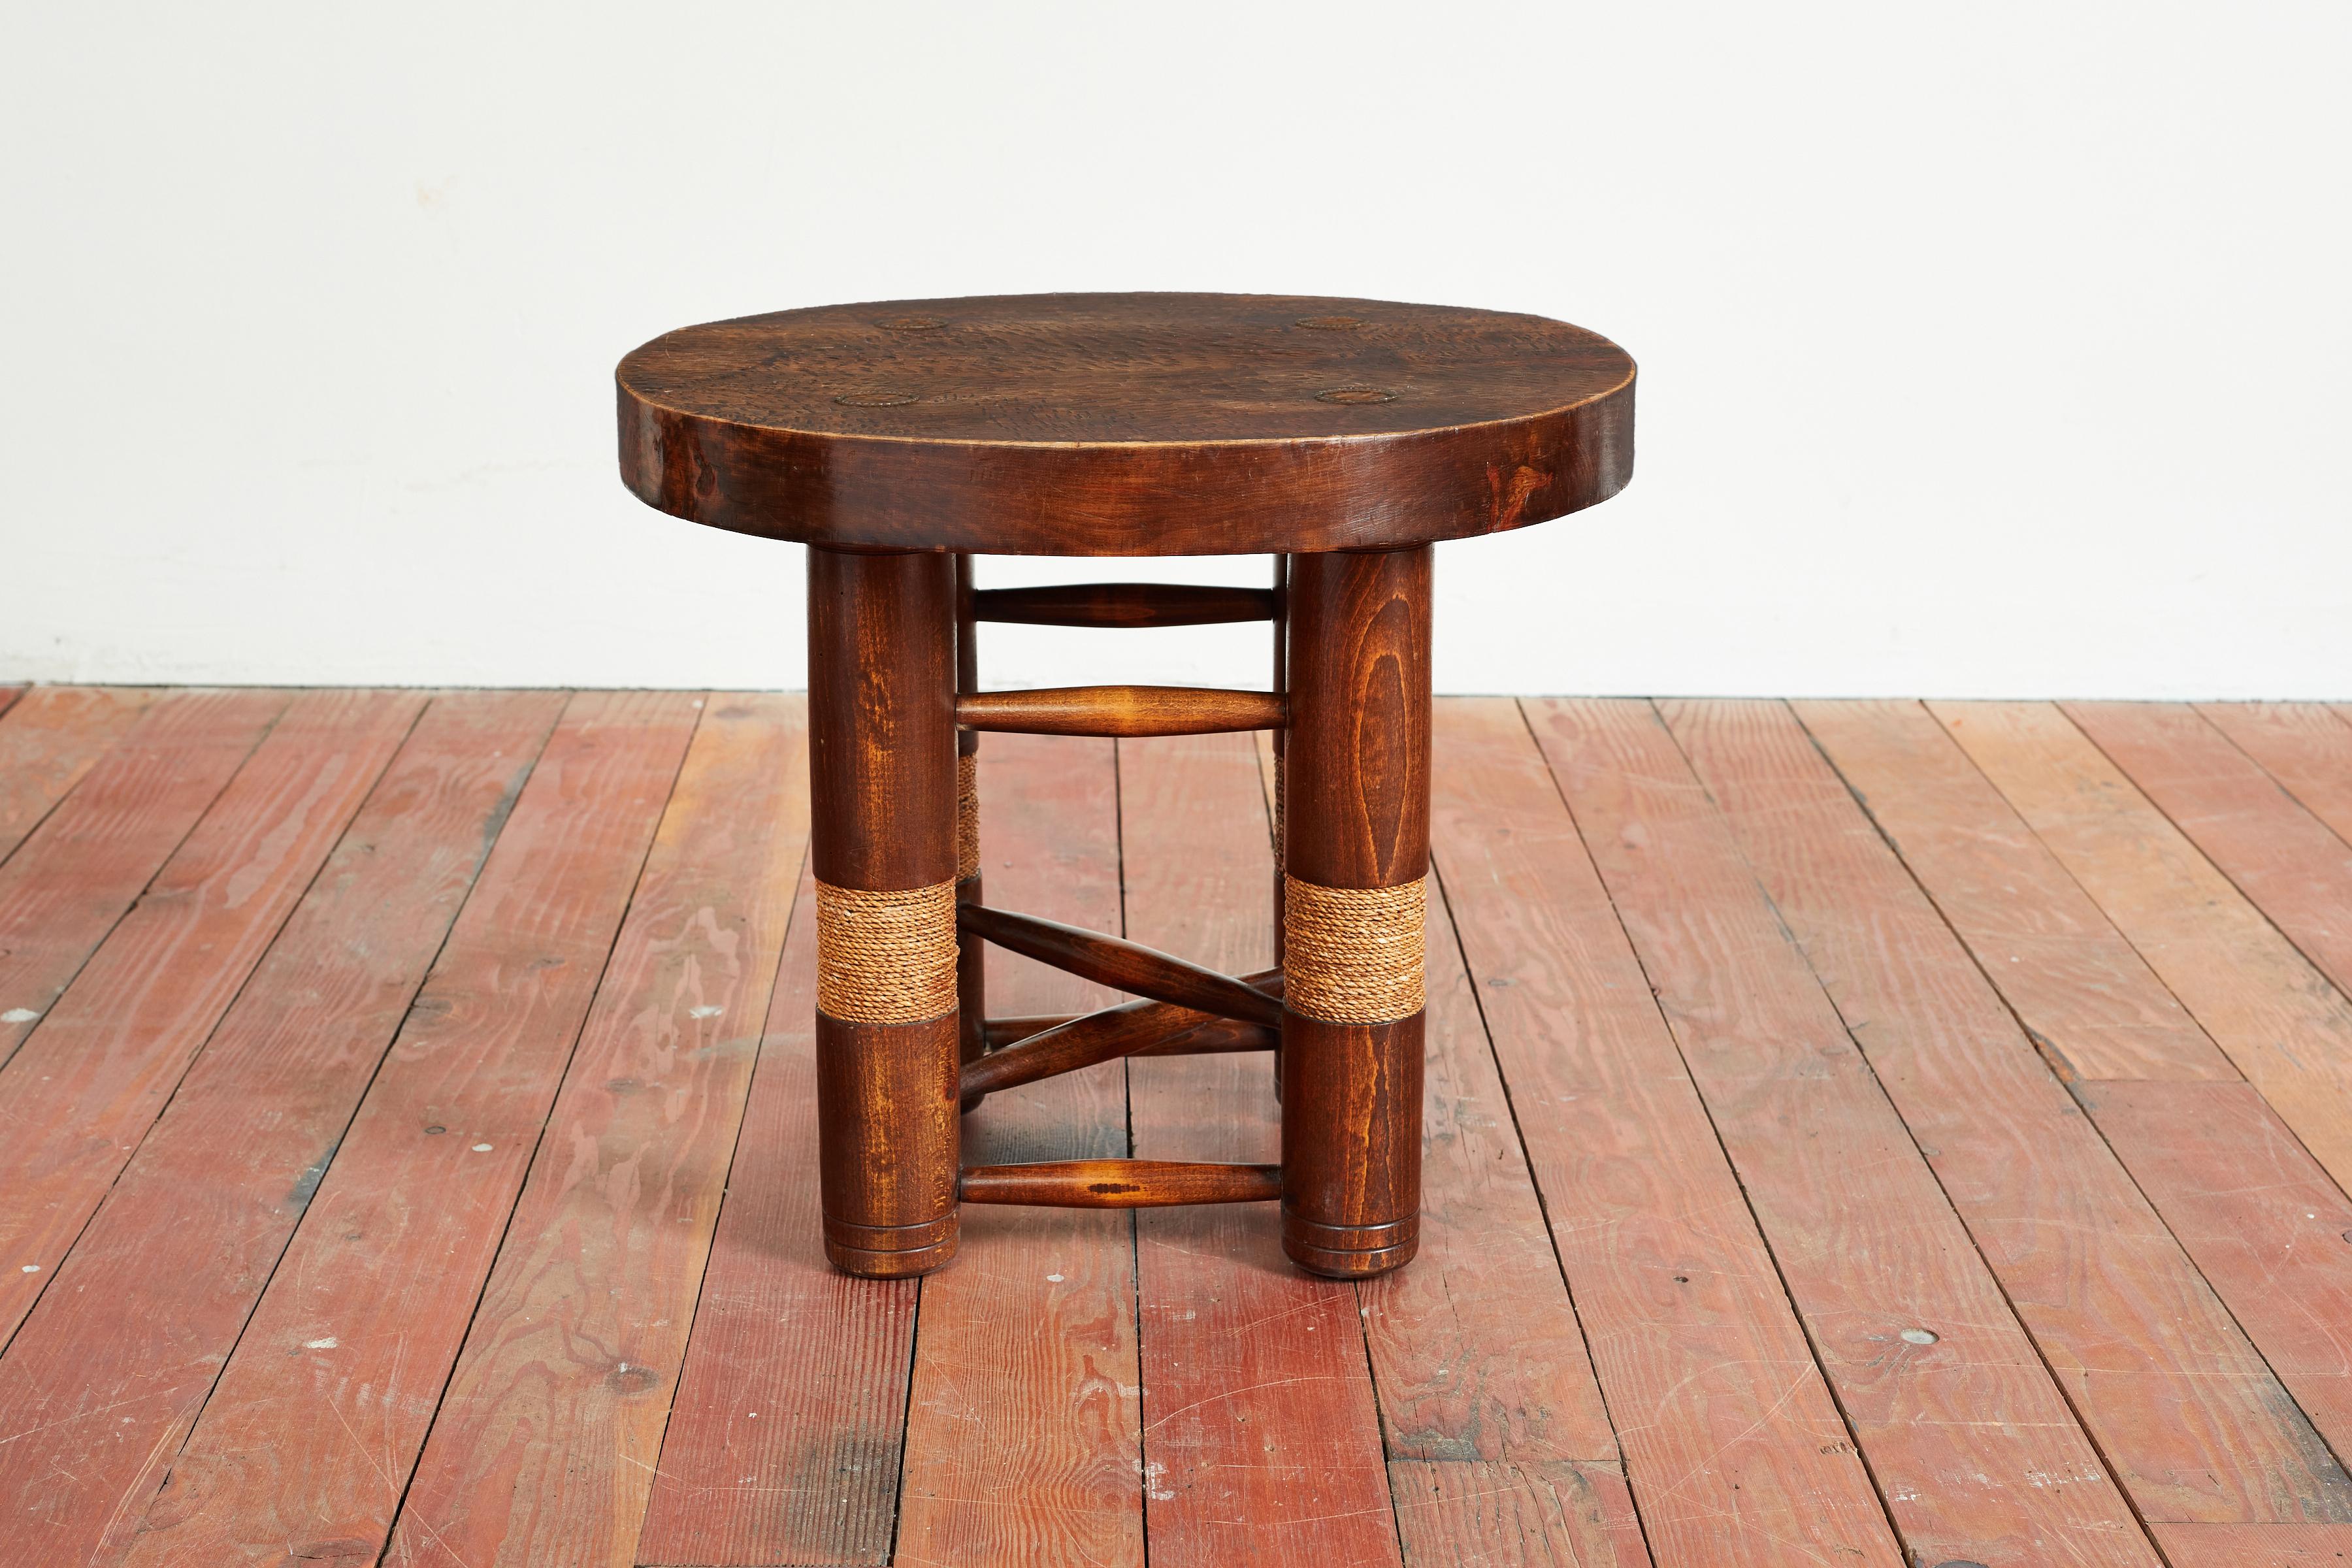 Fantastic rare side table by Charles Dudouyt with four wood cylindrical legs and carved wood and rope detailing. 
Top is hand carved etched with intricate copper nail detail.
